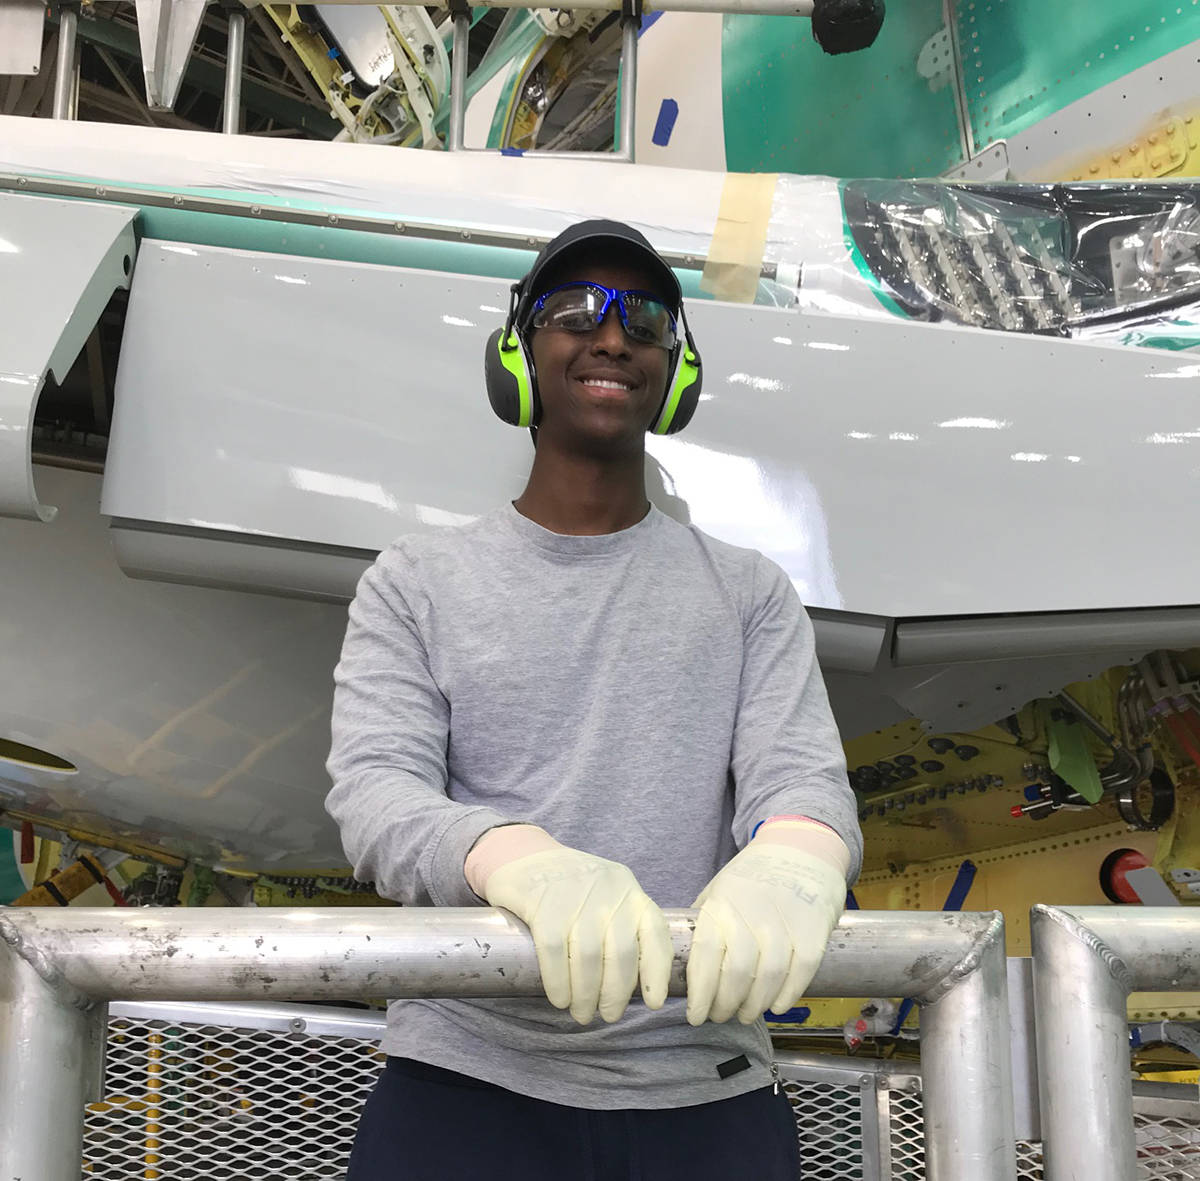 Core Plus Aerospace graduate Khalid Abdikarani is an electrician at The Boeing Company and is studying electrical engineering at the University of Washington.